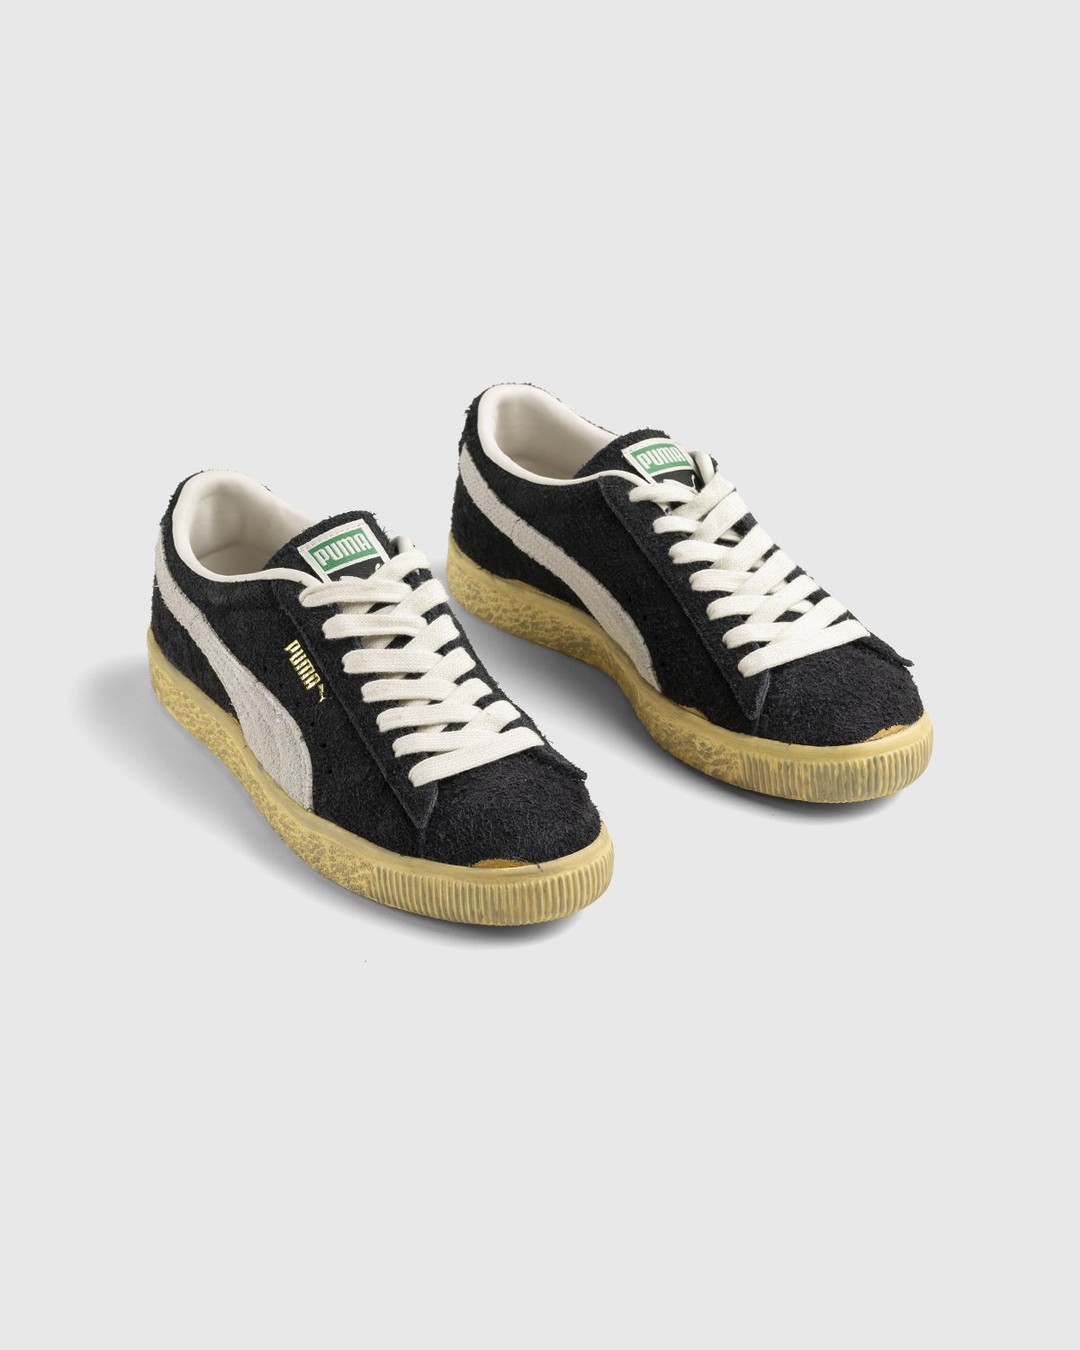 Puma – Suede Vintage The Never Worn Black White - Sneakers - Black - Image 3